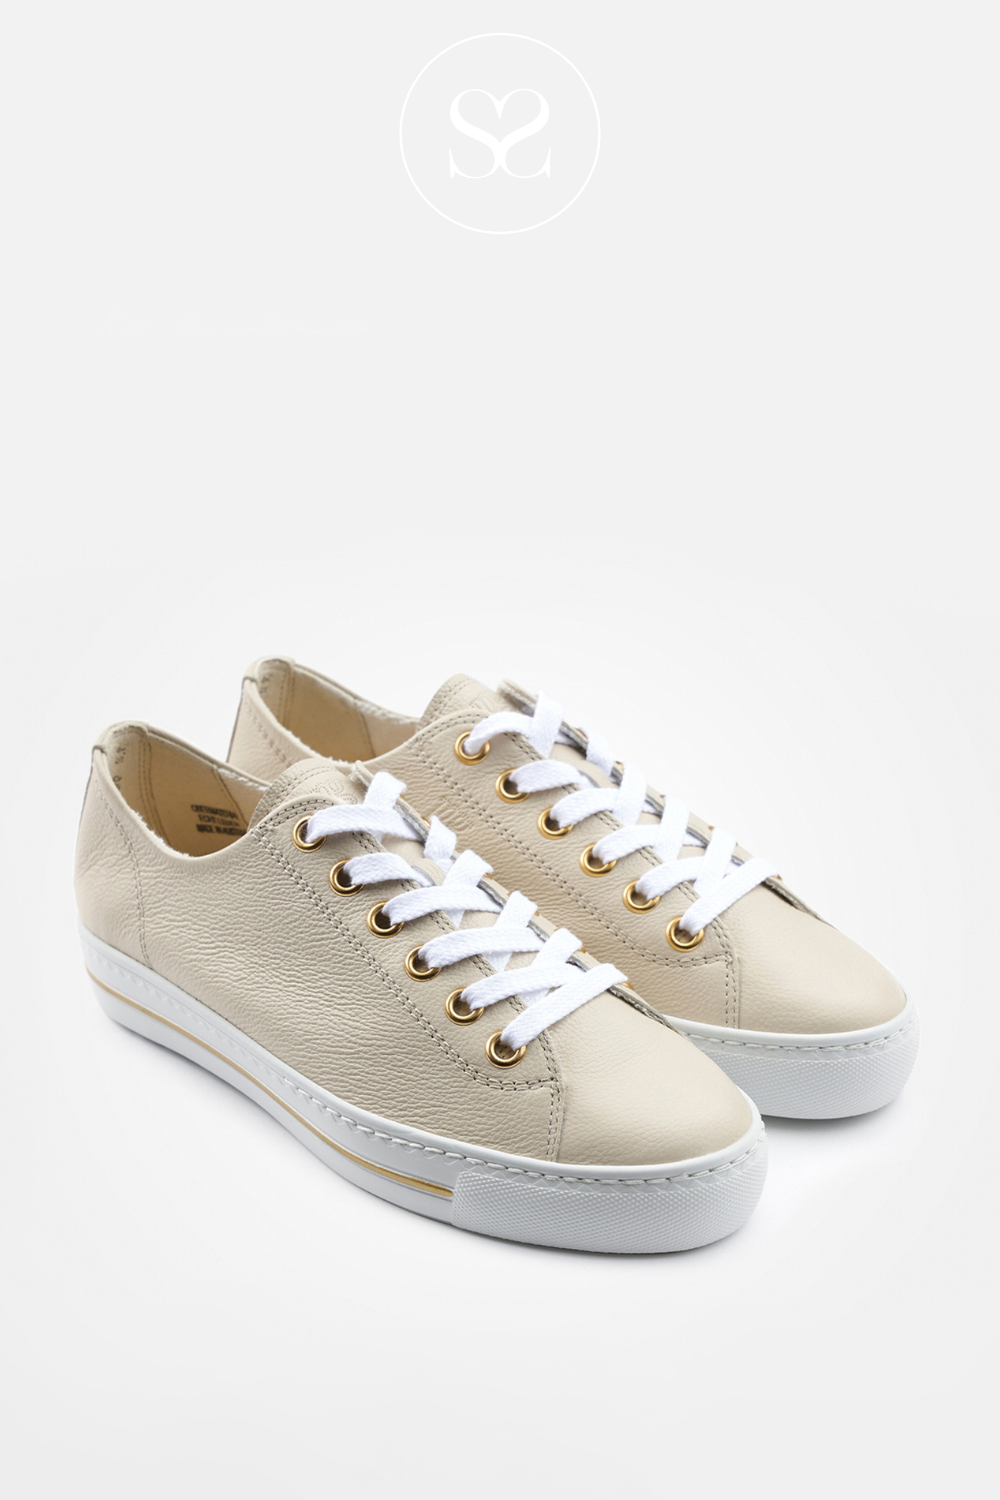 PAUL GREEN 4704 - CREAM LEATHER TRAINERS